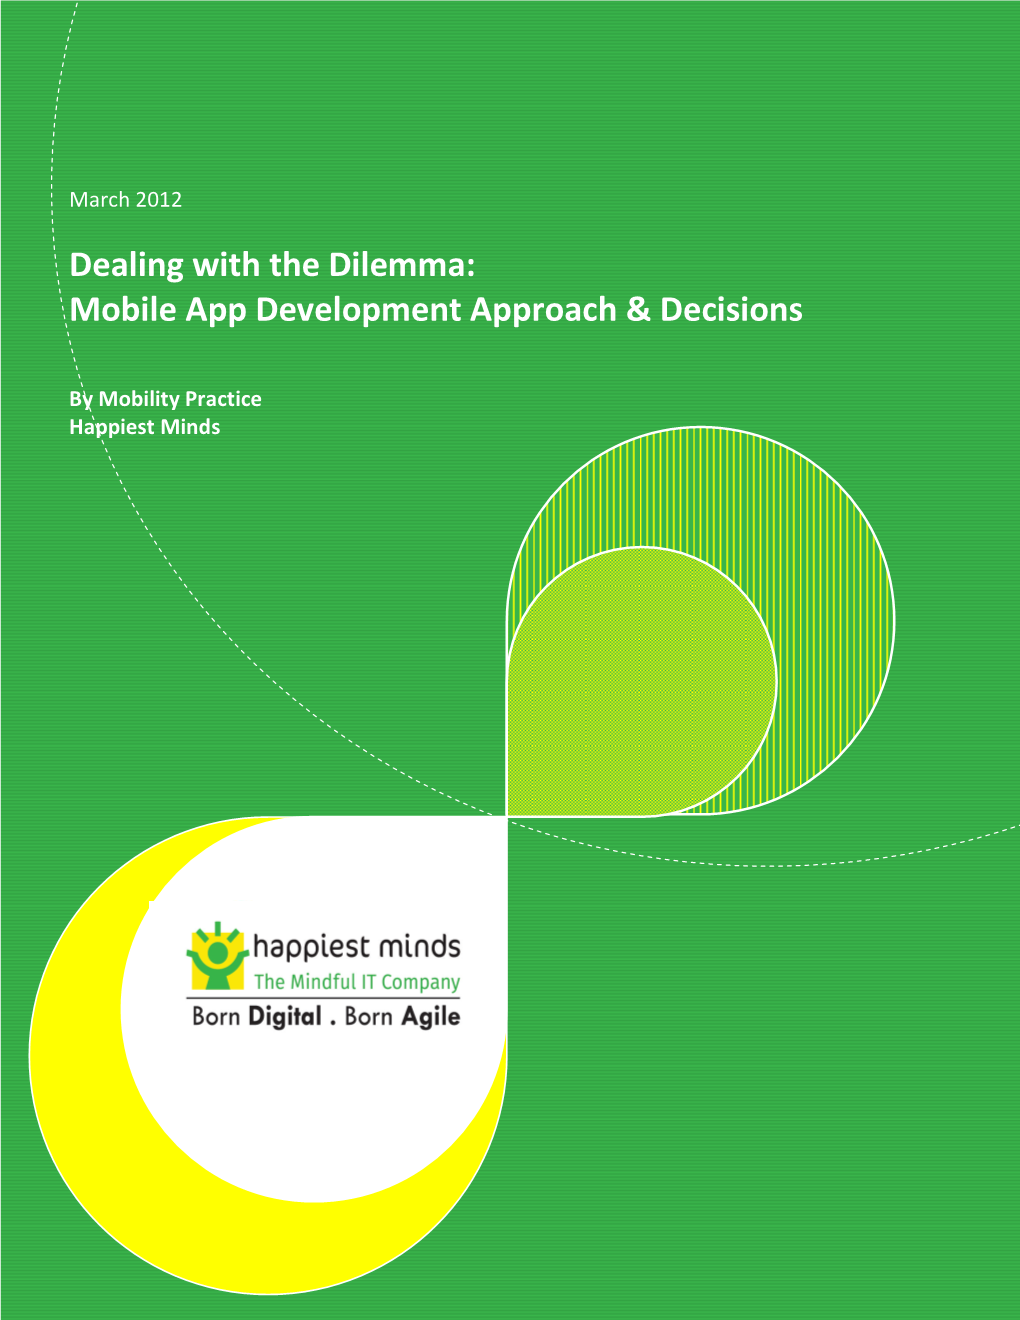 Dealing with the Dilemma: Mobile App Development Approach & Decisions